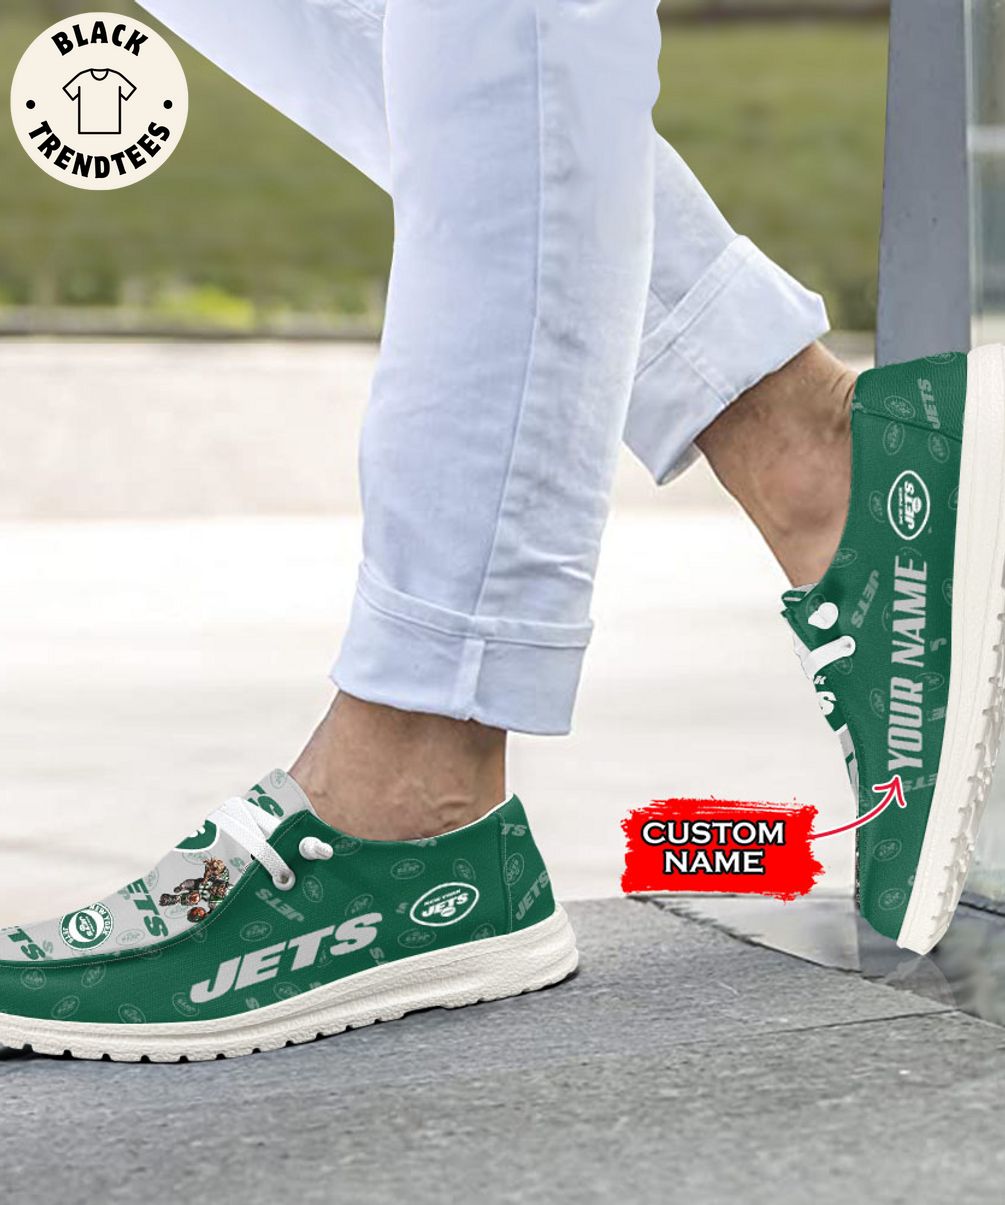 [BEST] NFL New York Jets Custom Name Hey Dude Shoes